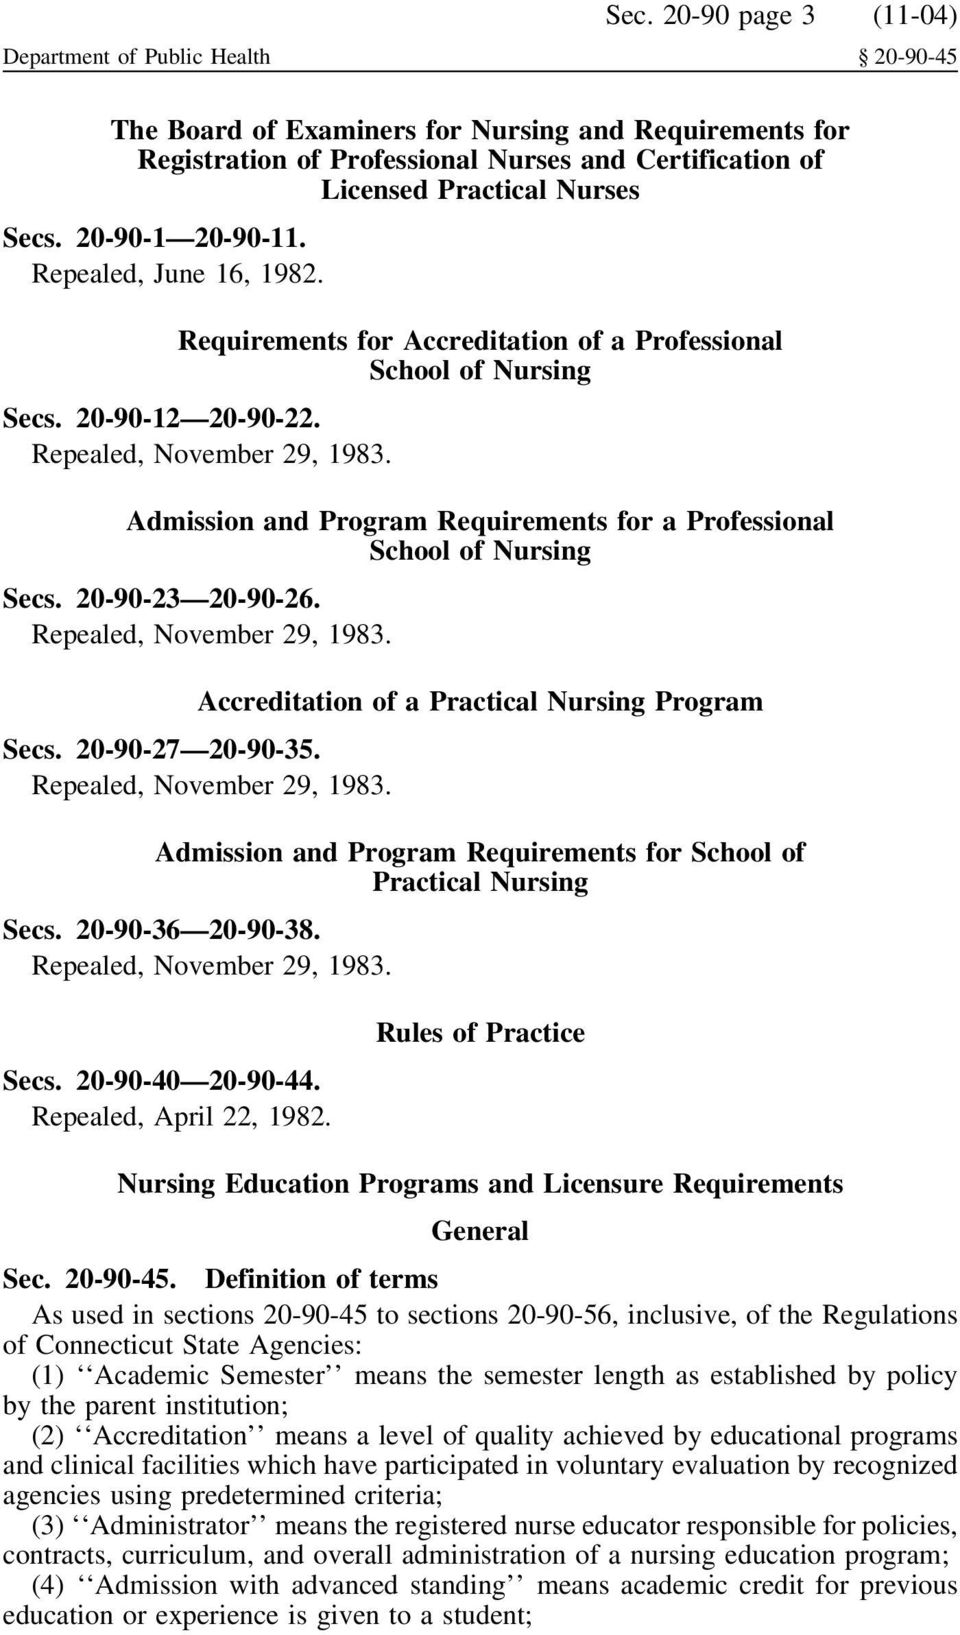 Repealed, June 16, 1982. Requirements for Accreditation of a Professional School of Nursing Secs. 20-90-12 20-90-22. Repealed, November 29, 1983.